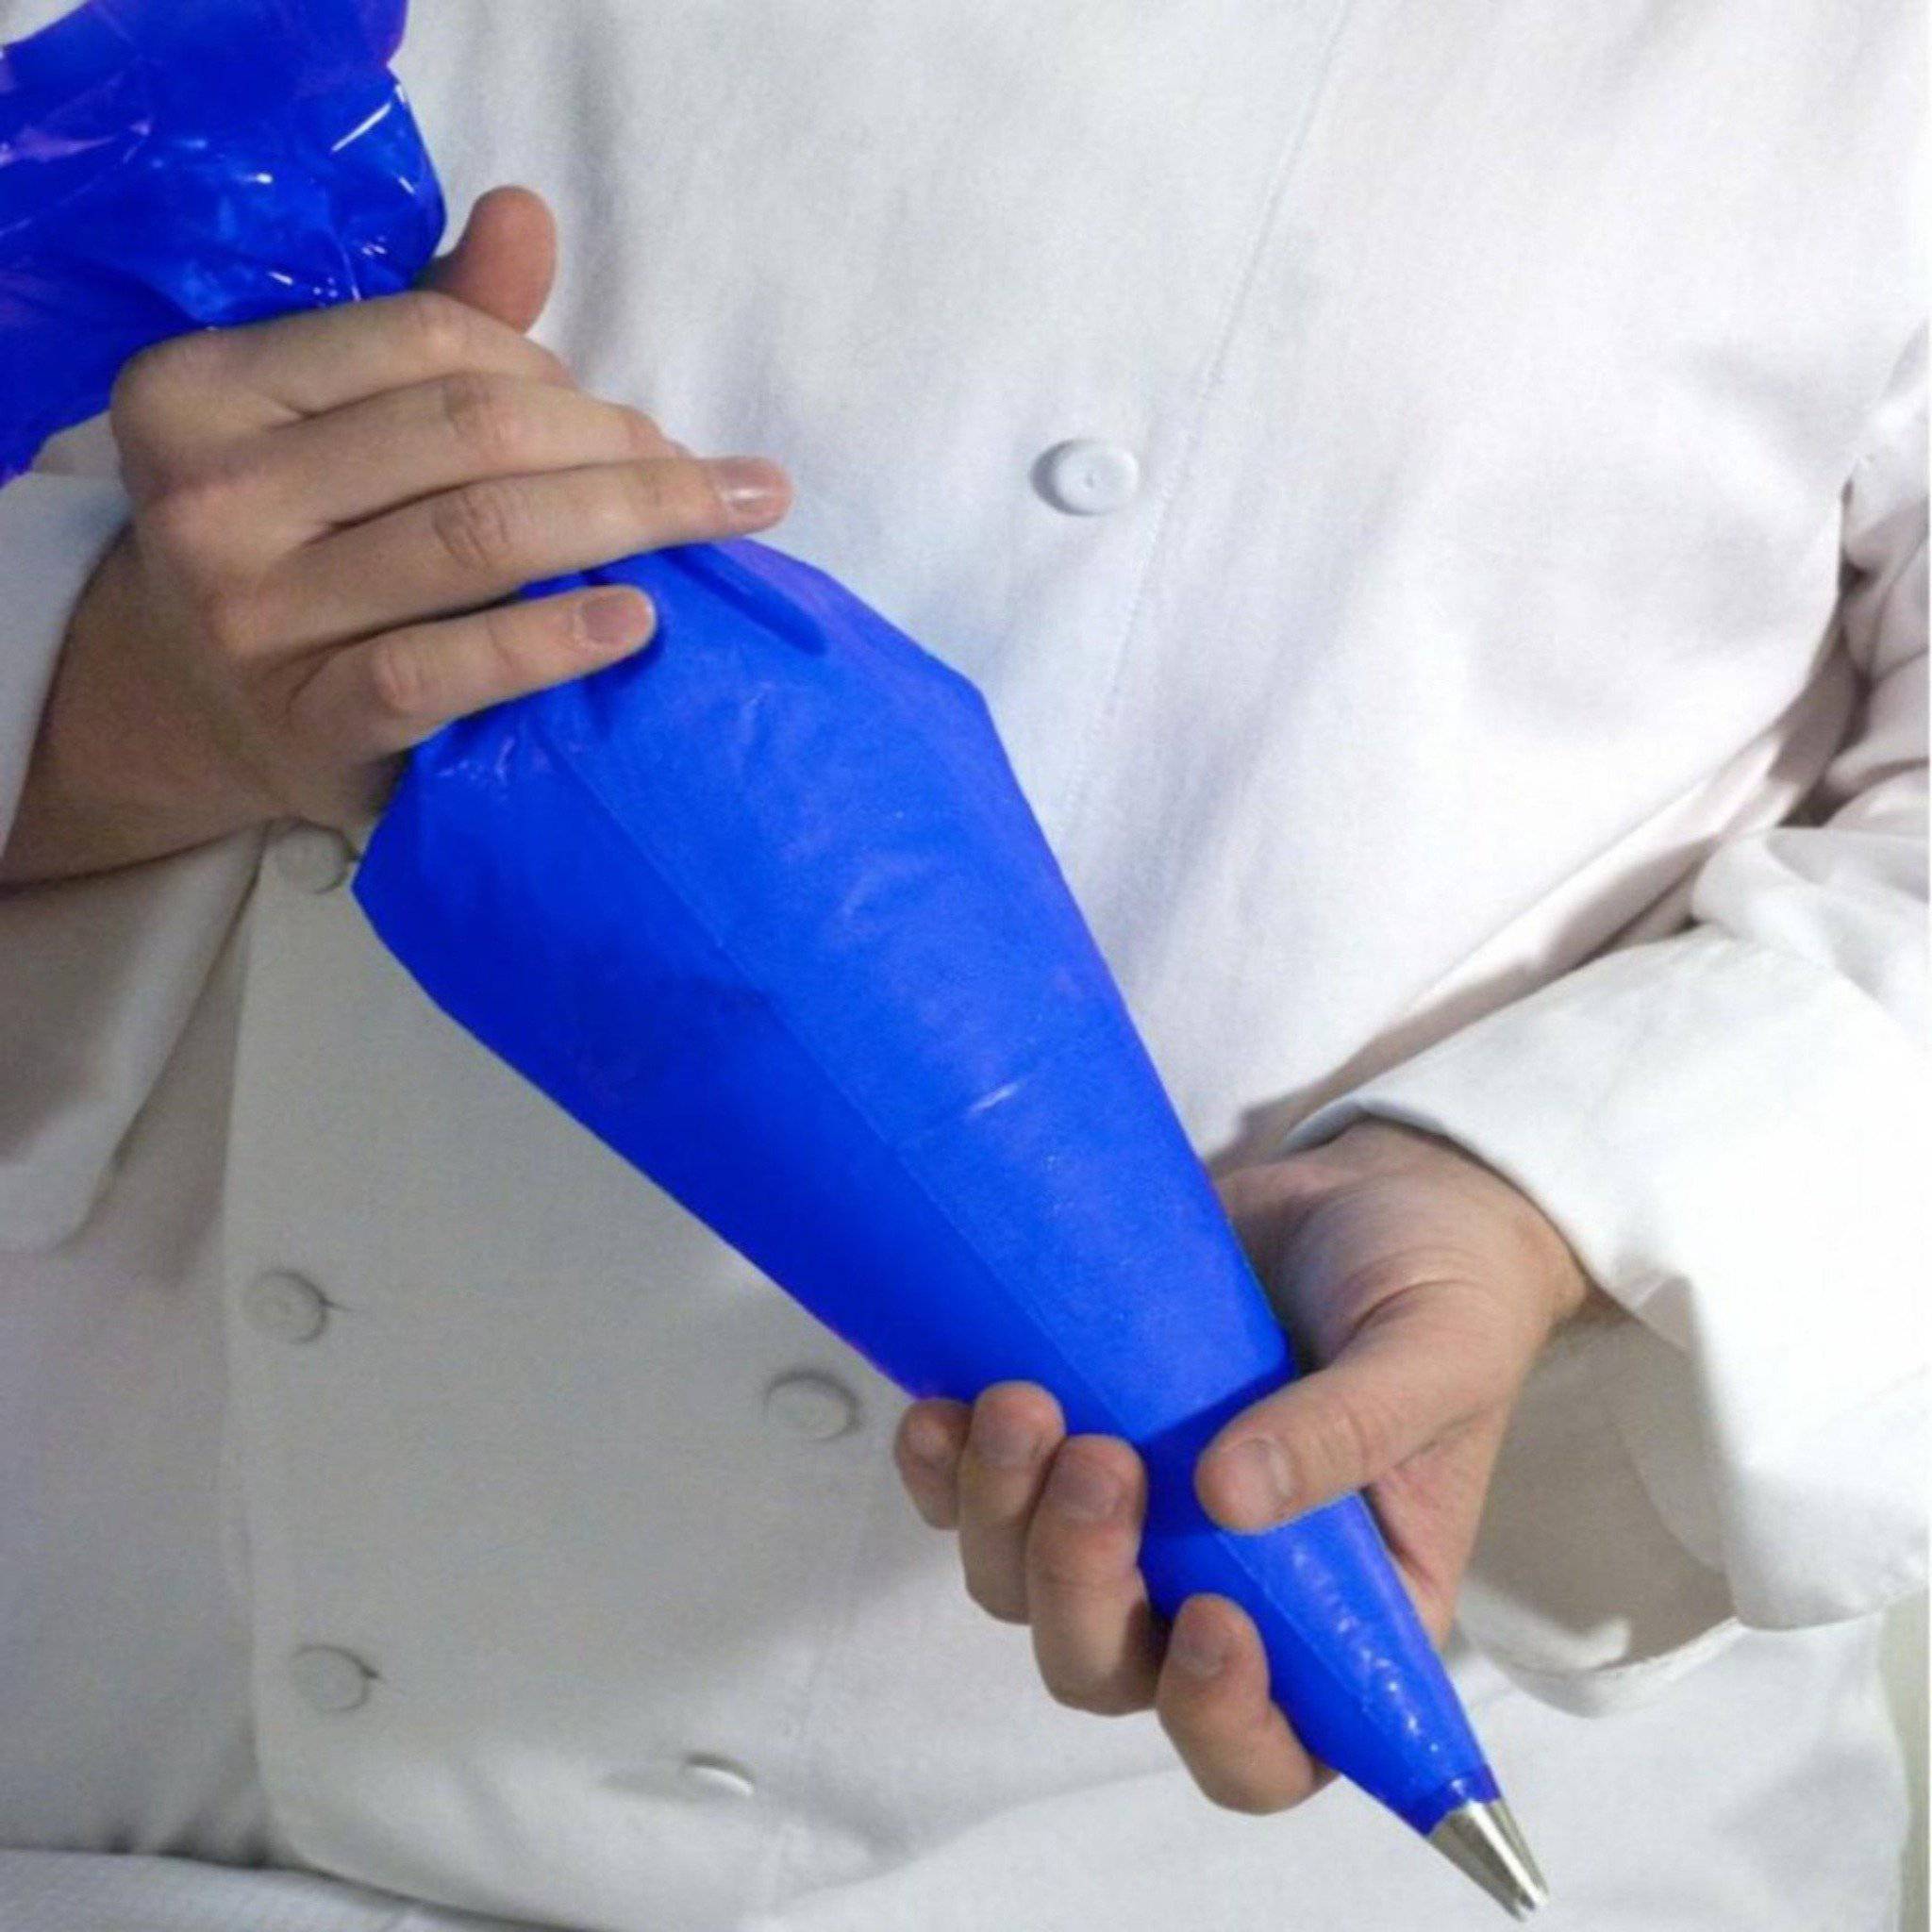 How to Make a Piping Bag | Institute of Culinary Education